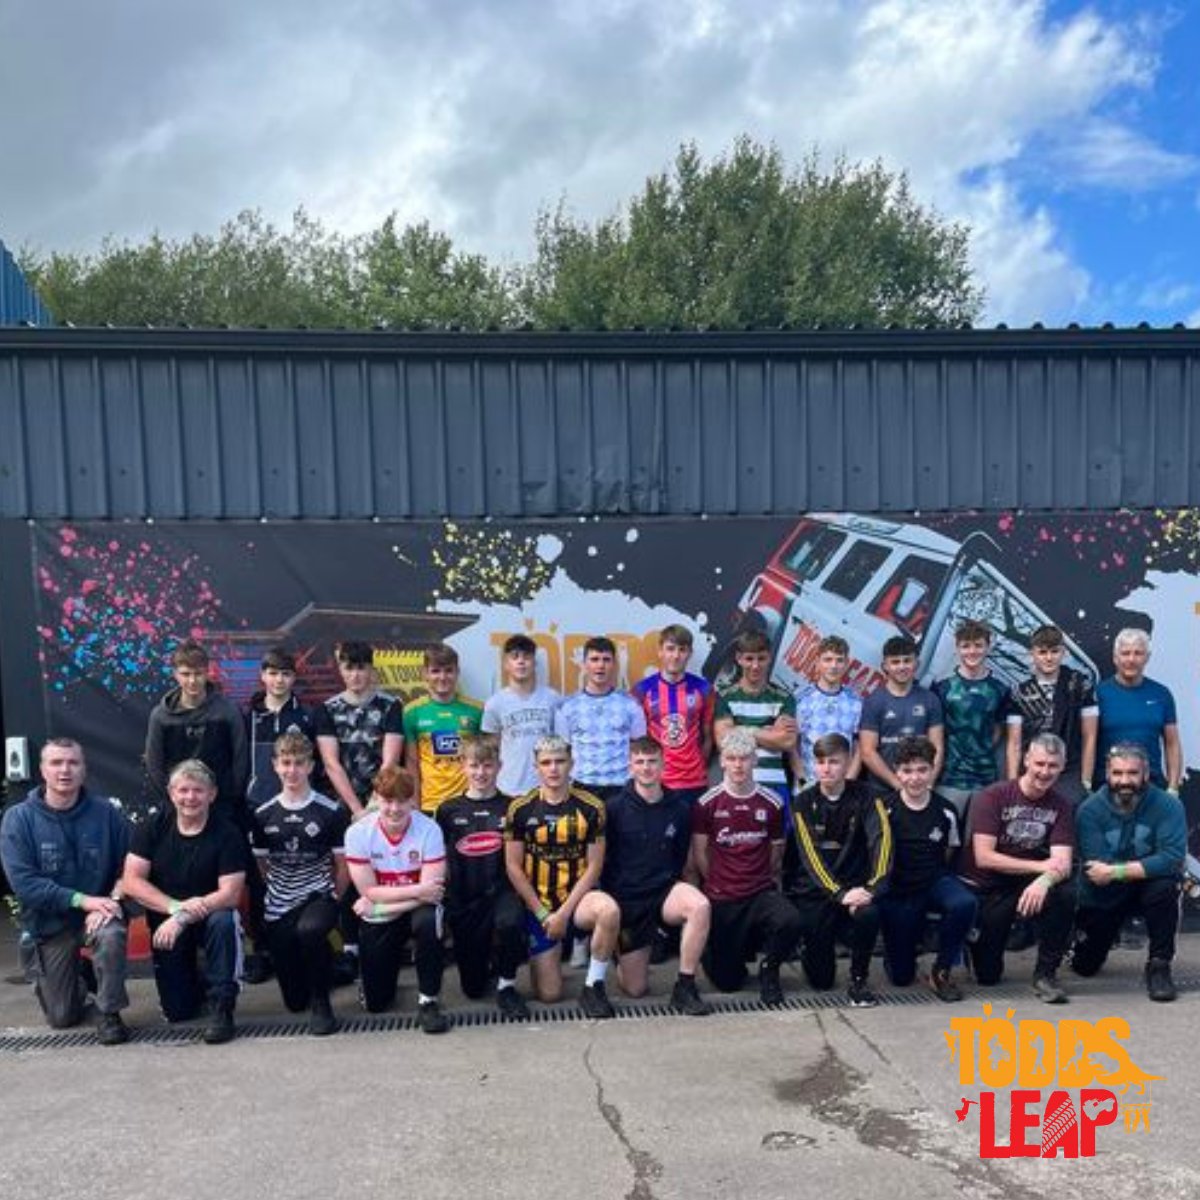 Why not treat your team to a fantastic day out at Todds Leap to finish the year on a high note? We have a wide range of teambuilding games & fun activities that will suit the whole team😆 Get in touch - (028) 85567170 or email enquiries@toddsleap.com #teamdayout #teambonding